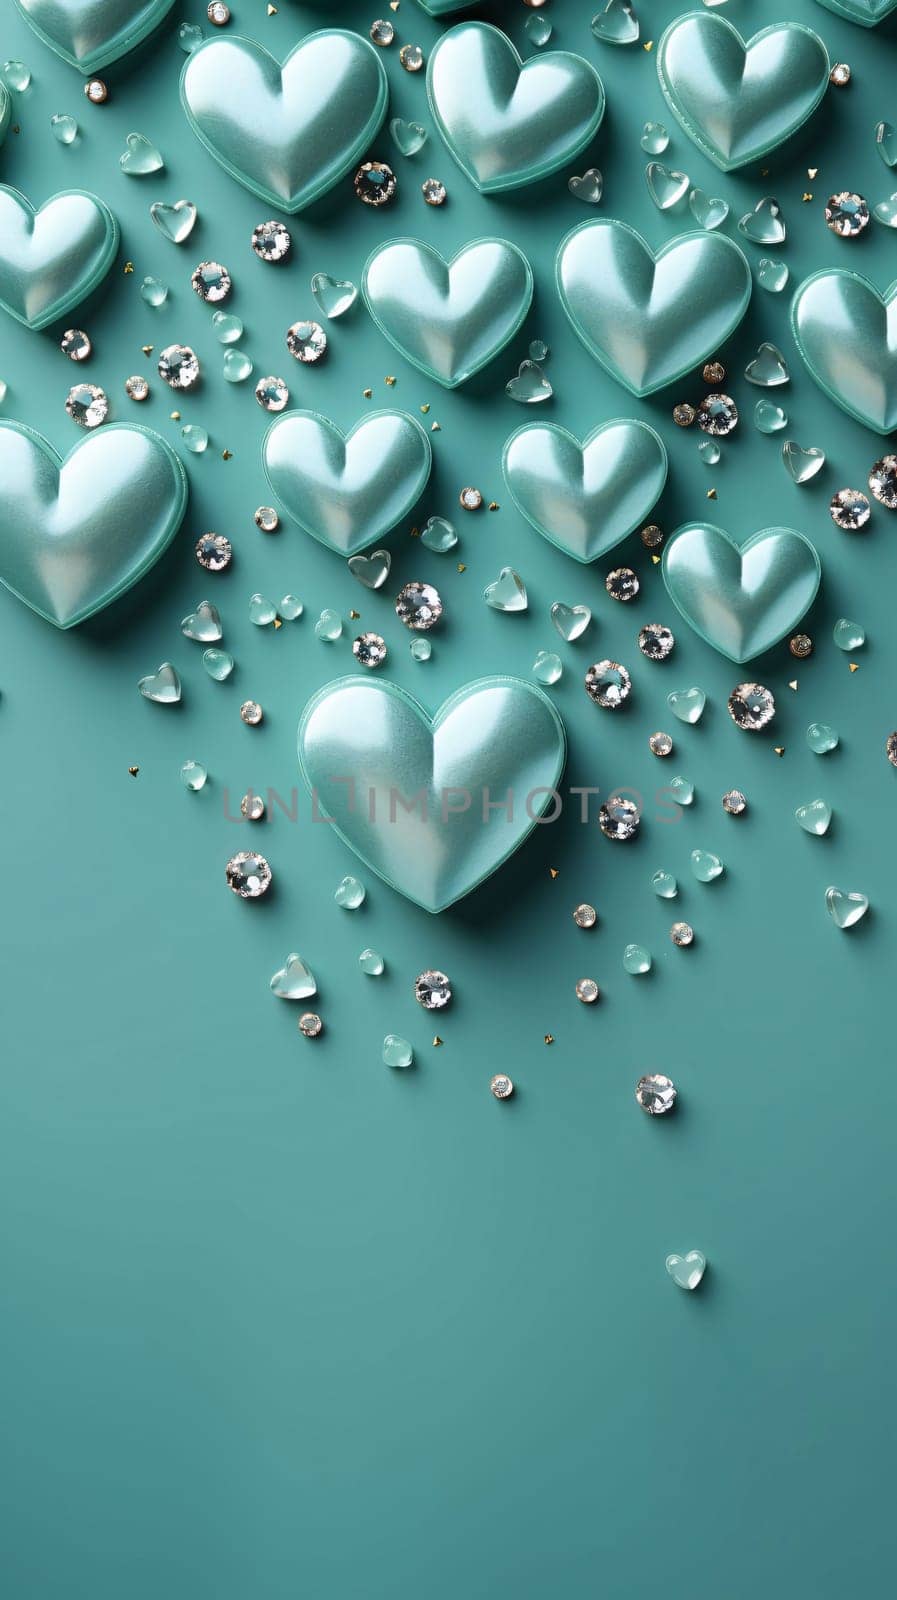 Green celadon hearts and scattered diamonds.Valentine's Day banner with space for your own content. by ThemesS